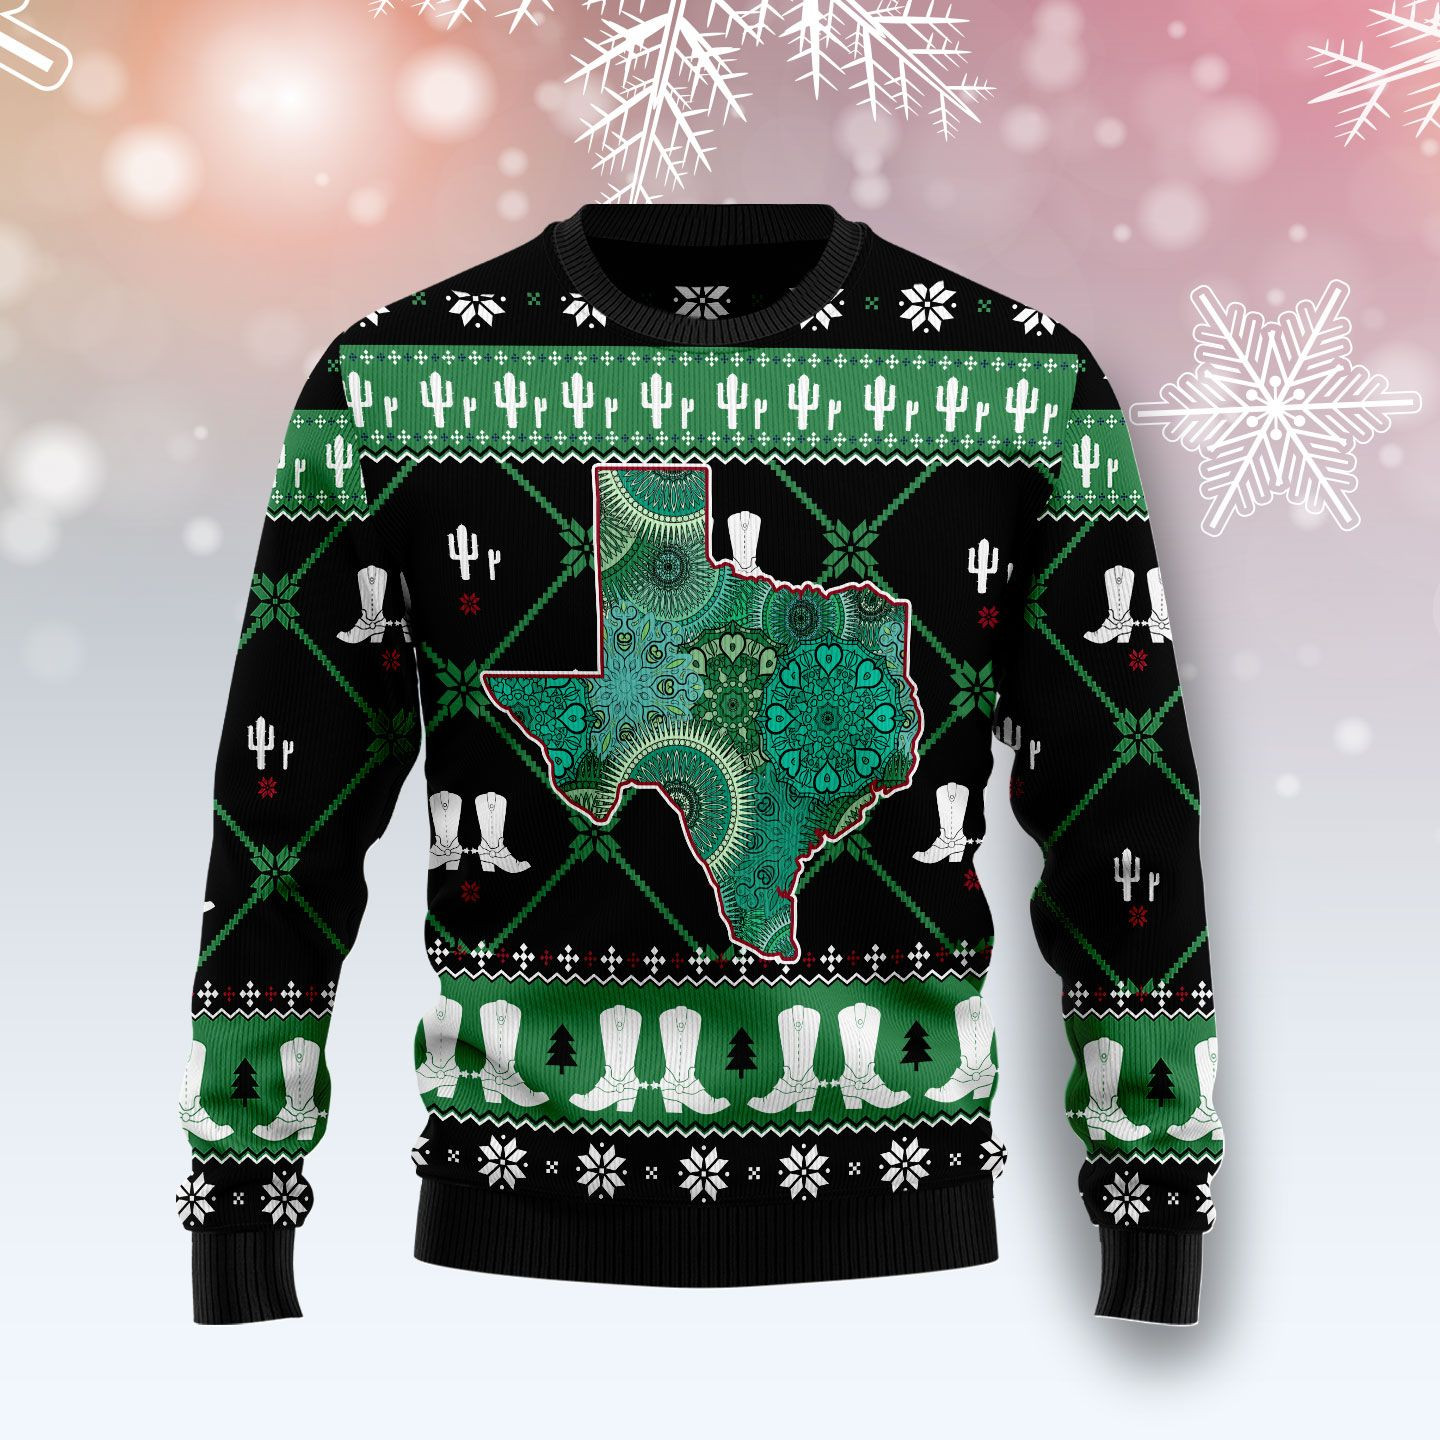 Texas USA Symbols Pattern Ugly Christmas Sweater Ugly Sweater For Men Women